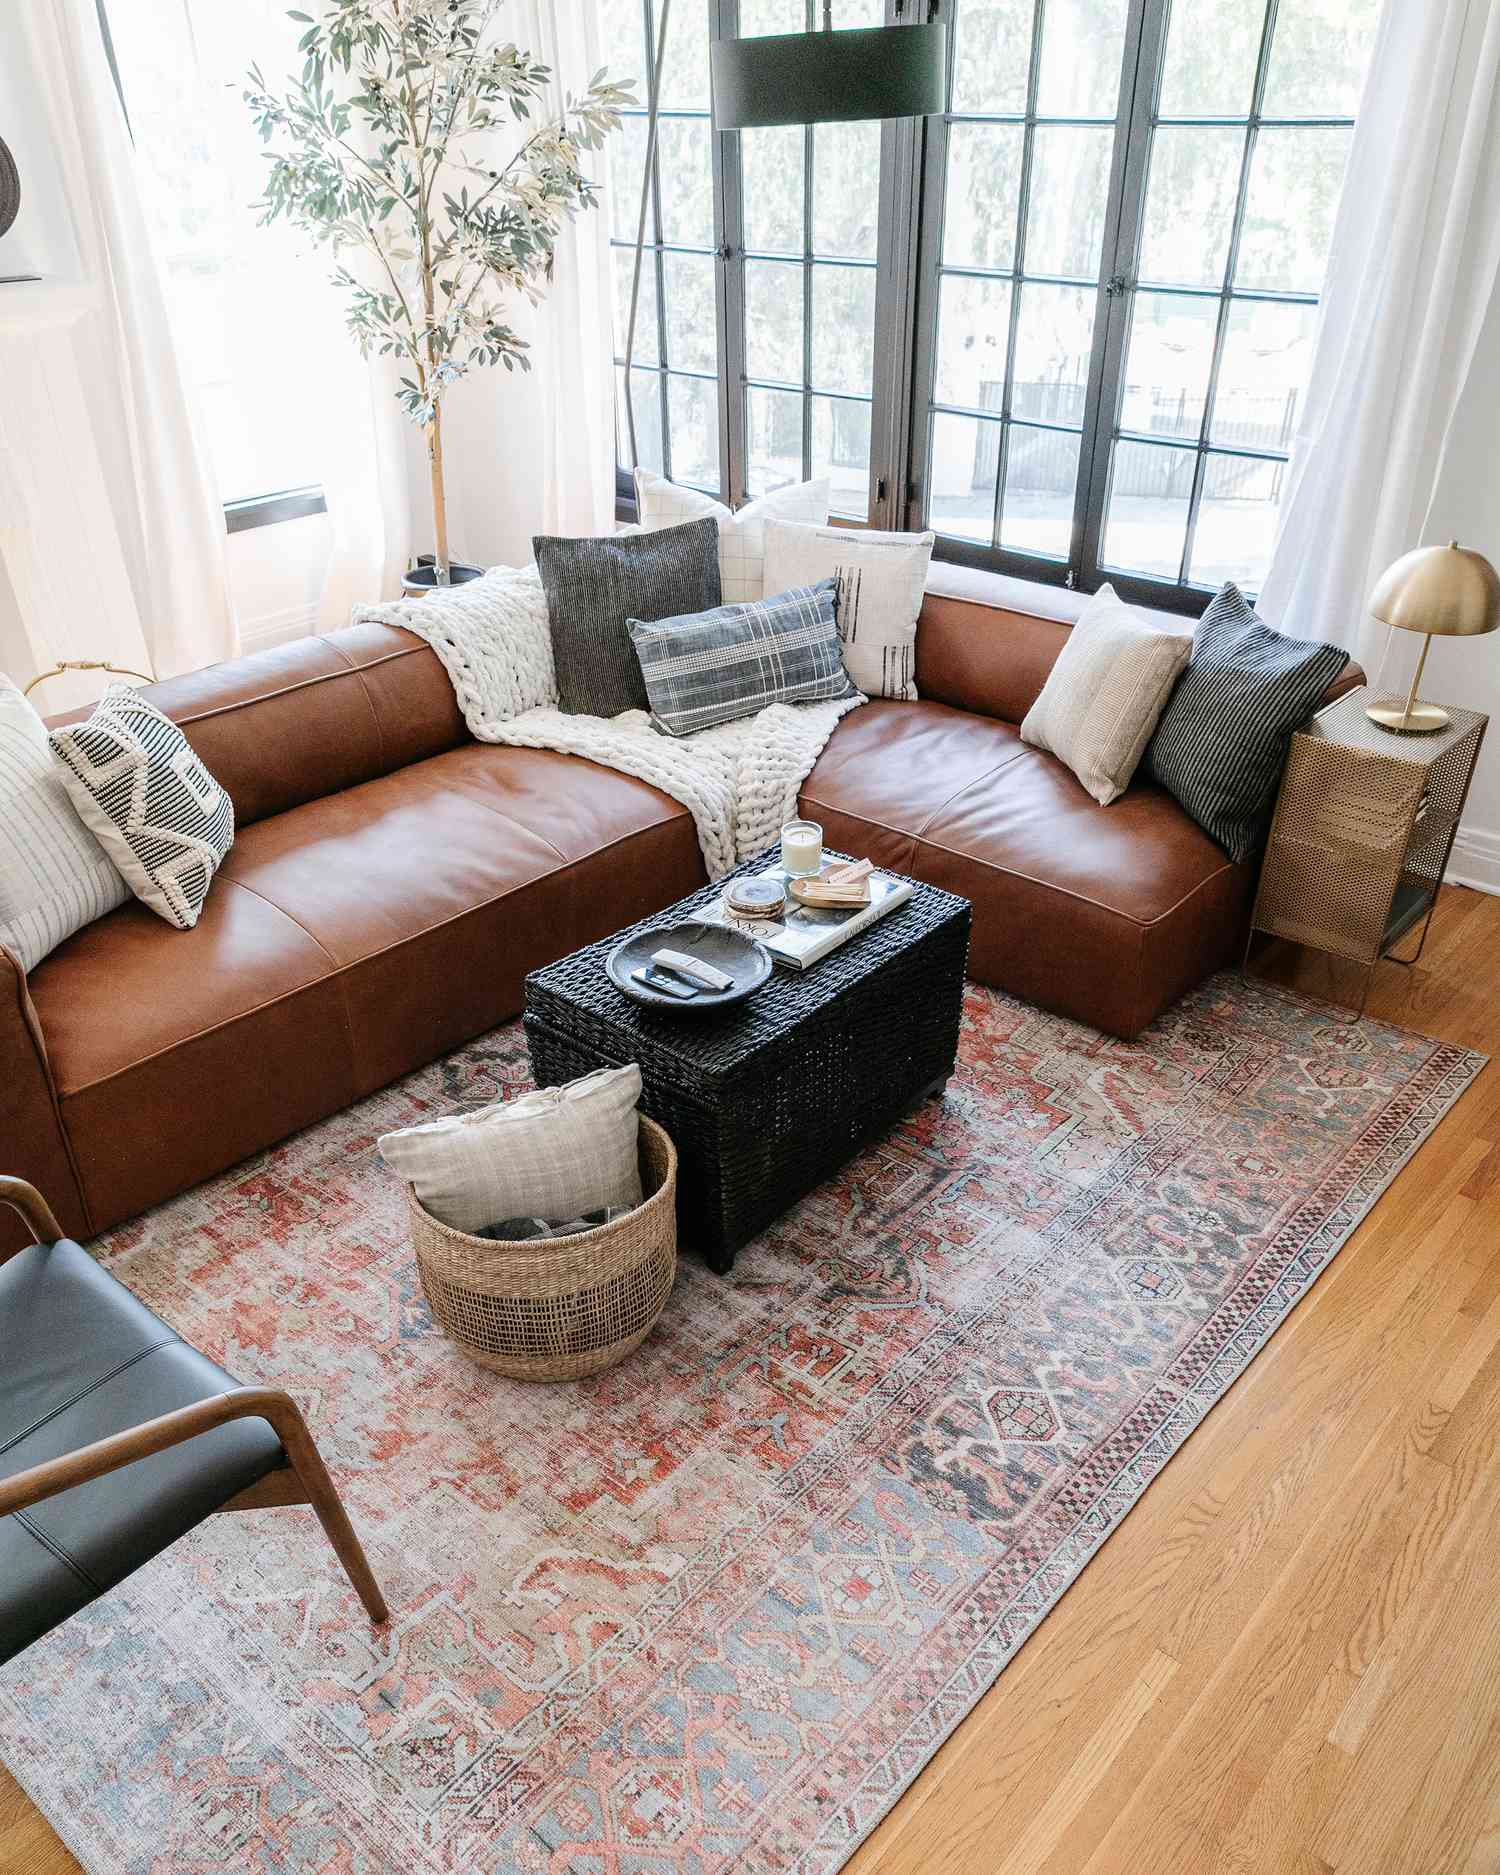 timeless furniture in the home of drew scott, the lone fox